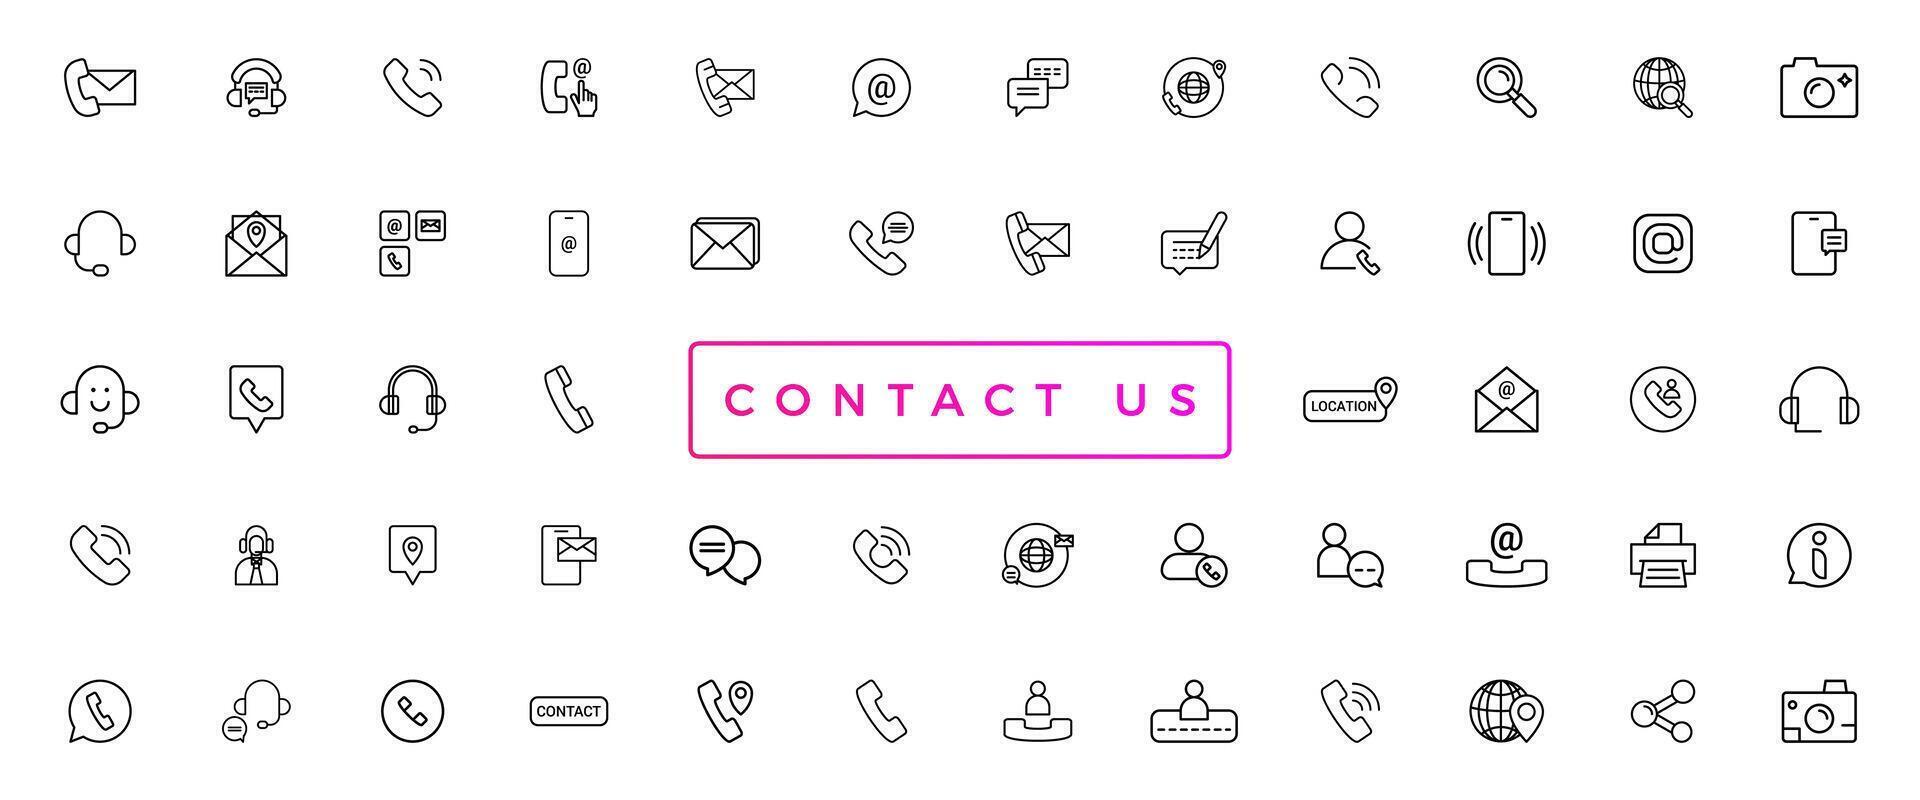 Contact Us web icons in line style. Web and mobile icon. Chat, support, message, phone. Vector illustration